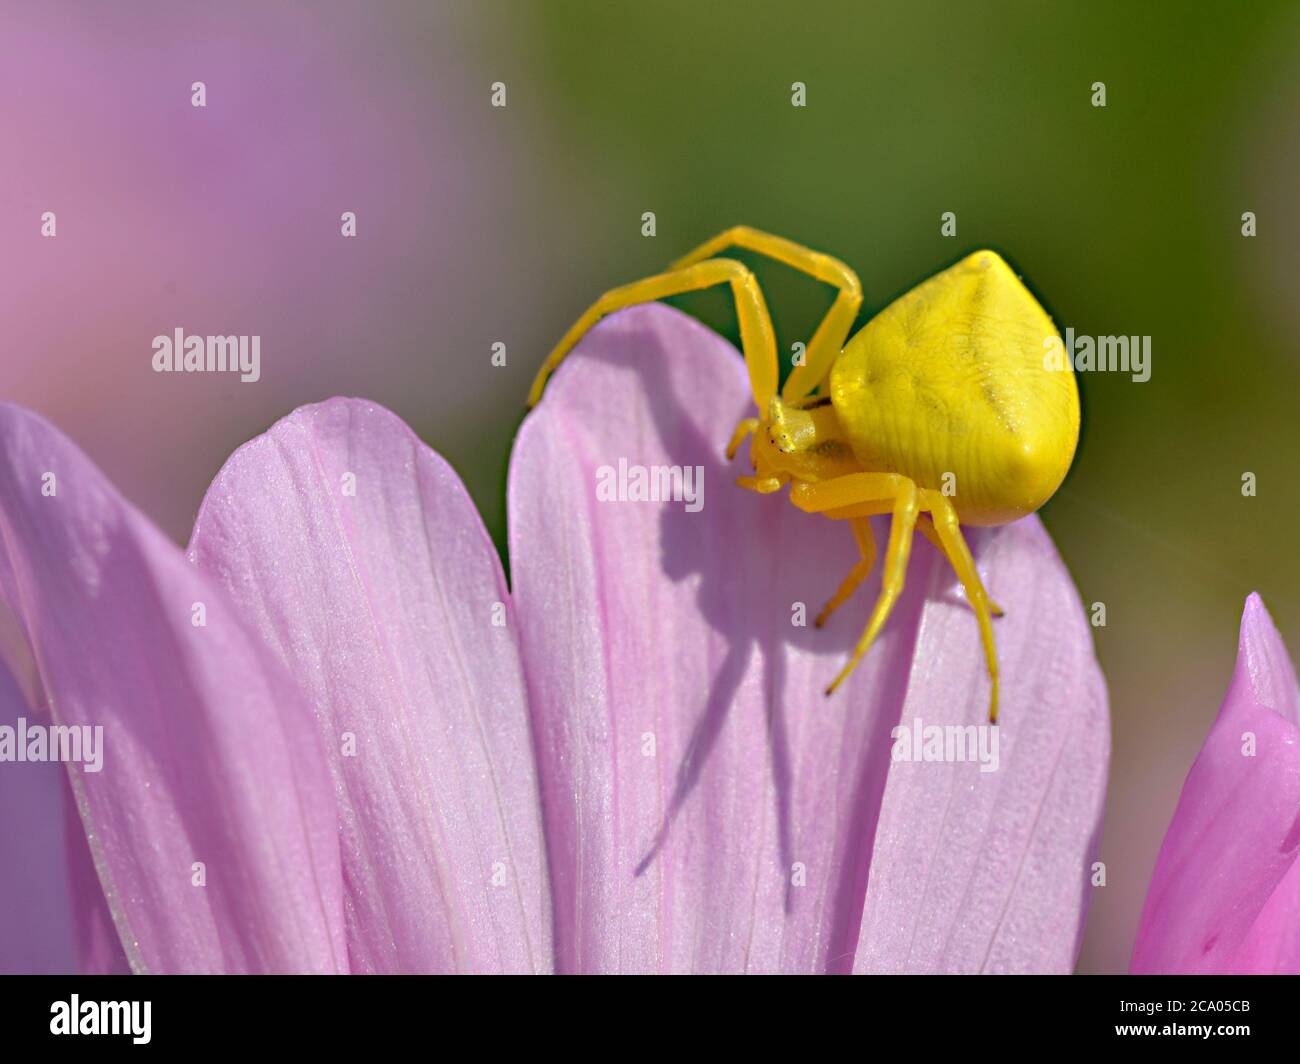 Macro of yellow crab spider (Misumena vatia) on pink petal cosmos flower seen from above Stock Photo